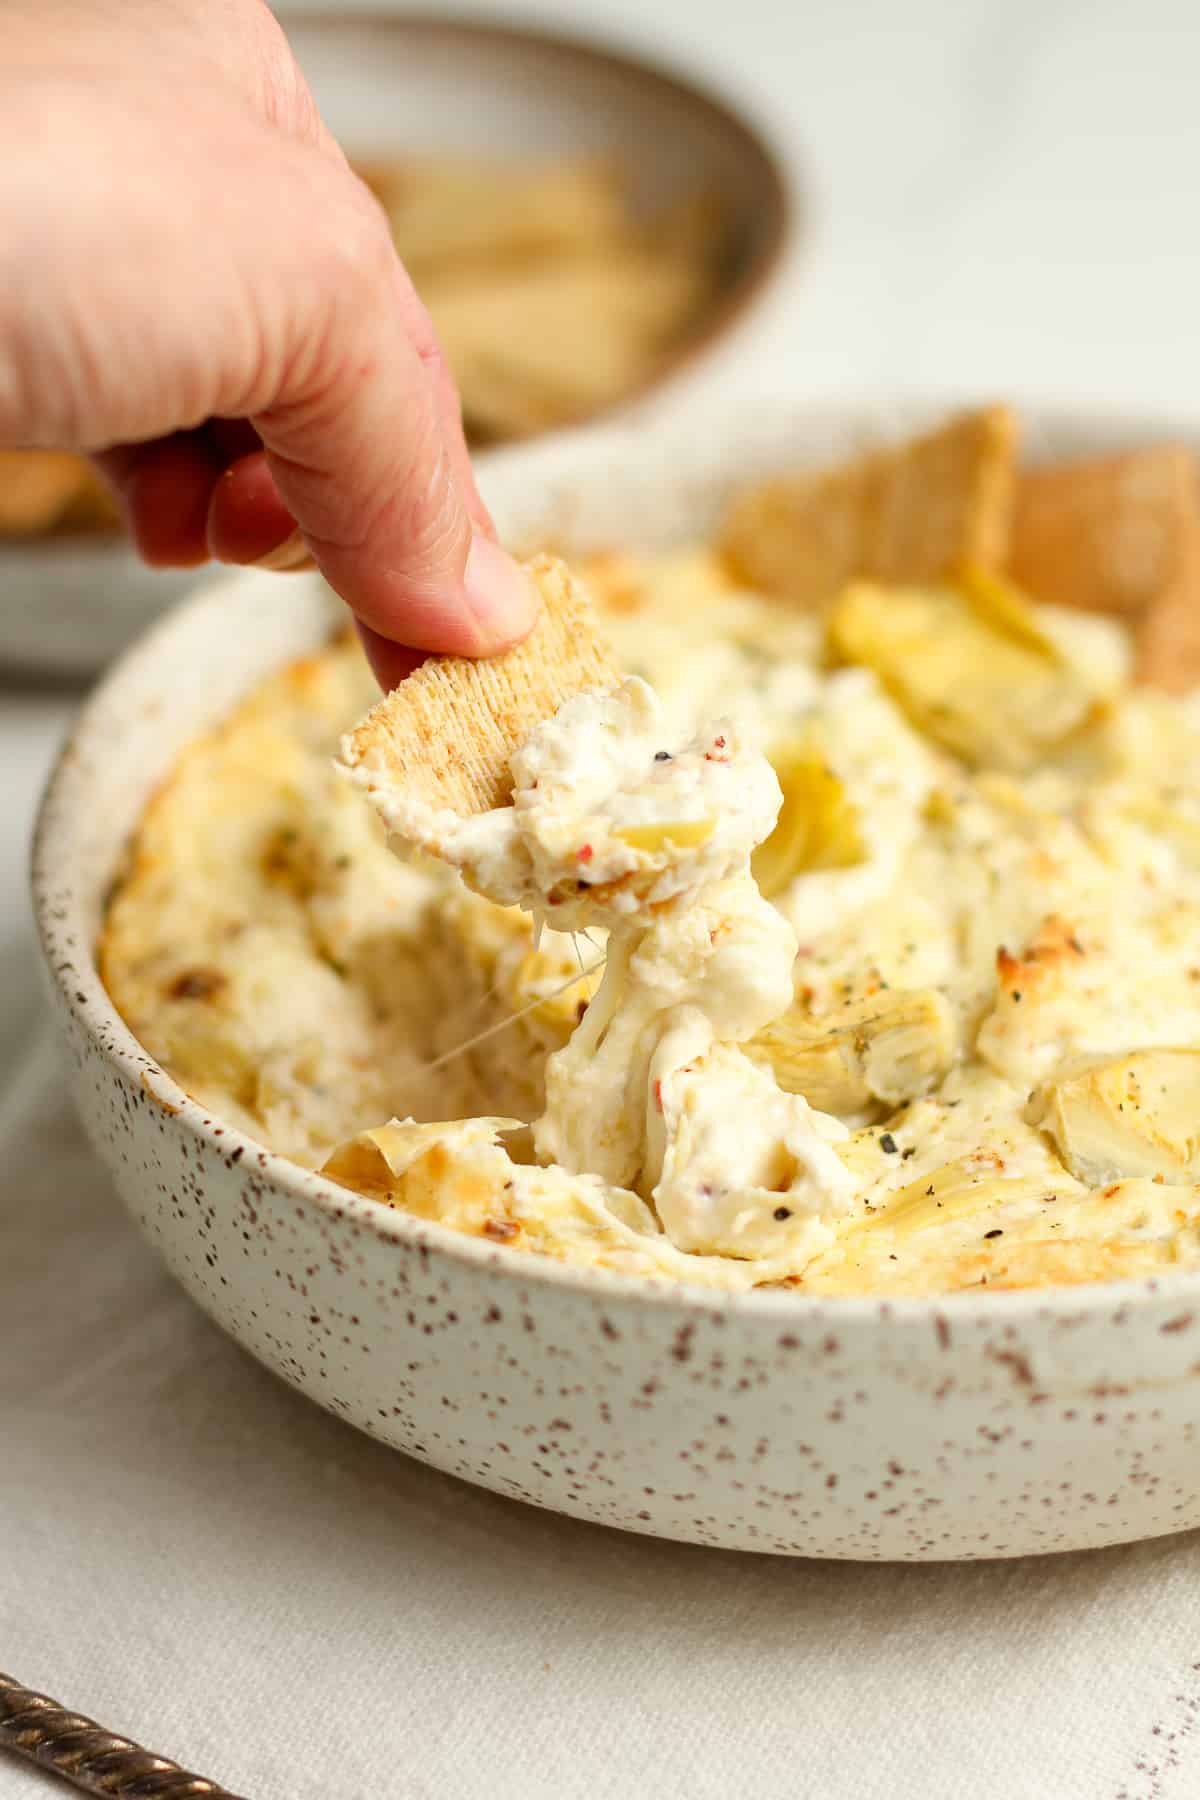 Side shot of a bowl of the dip with a hand dipping a cracker inside.